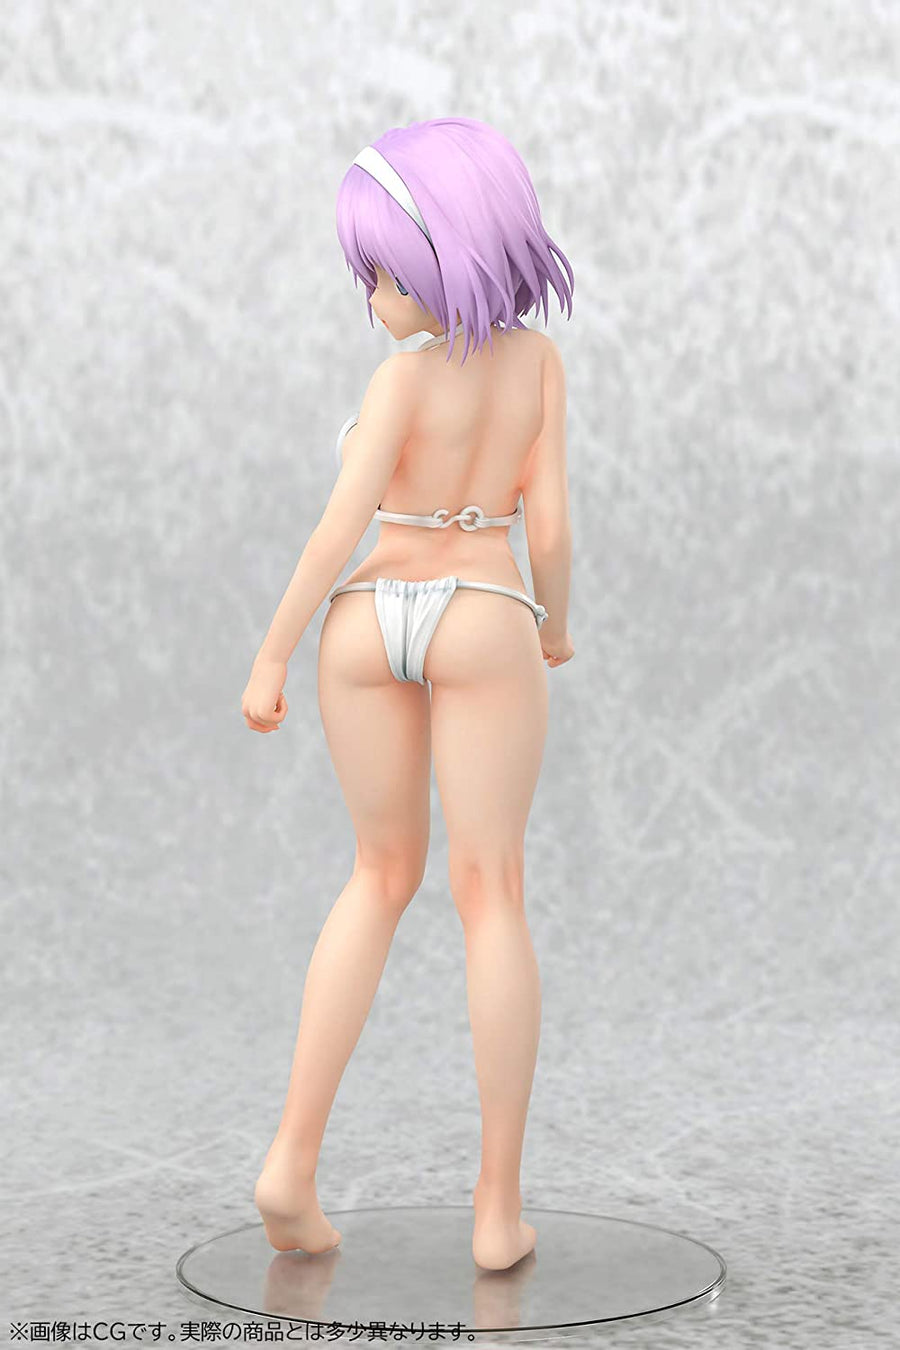 Original Character - Swimsuit Girls Collection - Minori - 1/5 - With Feet Ver. (Insight)